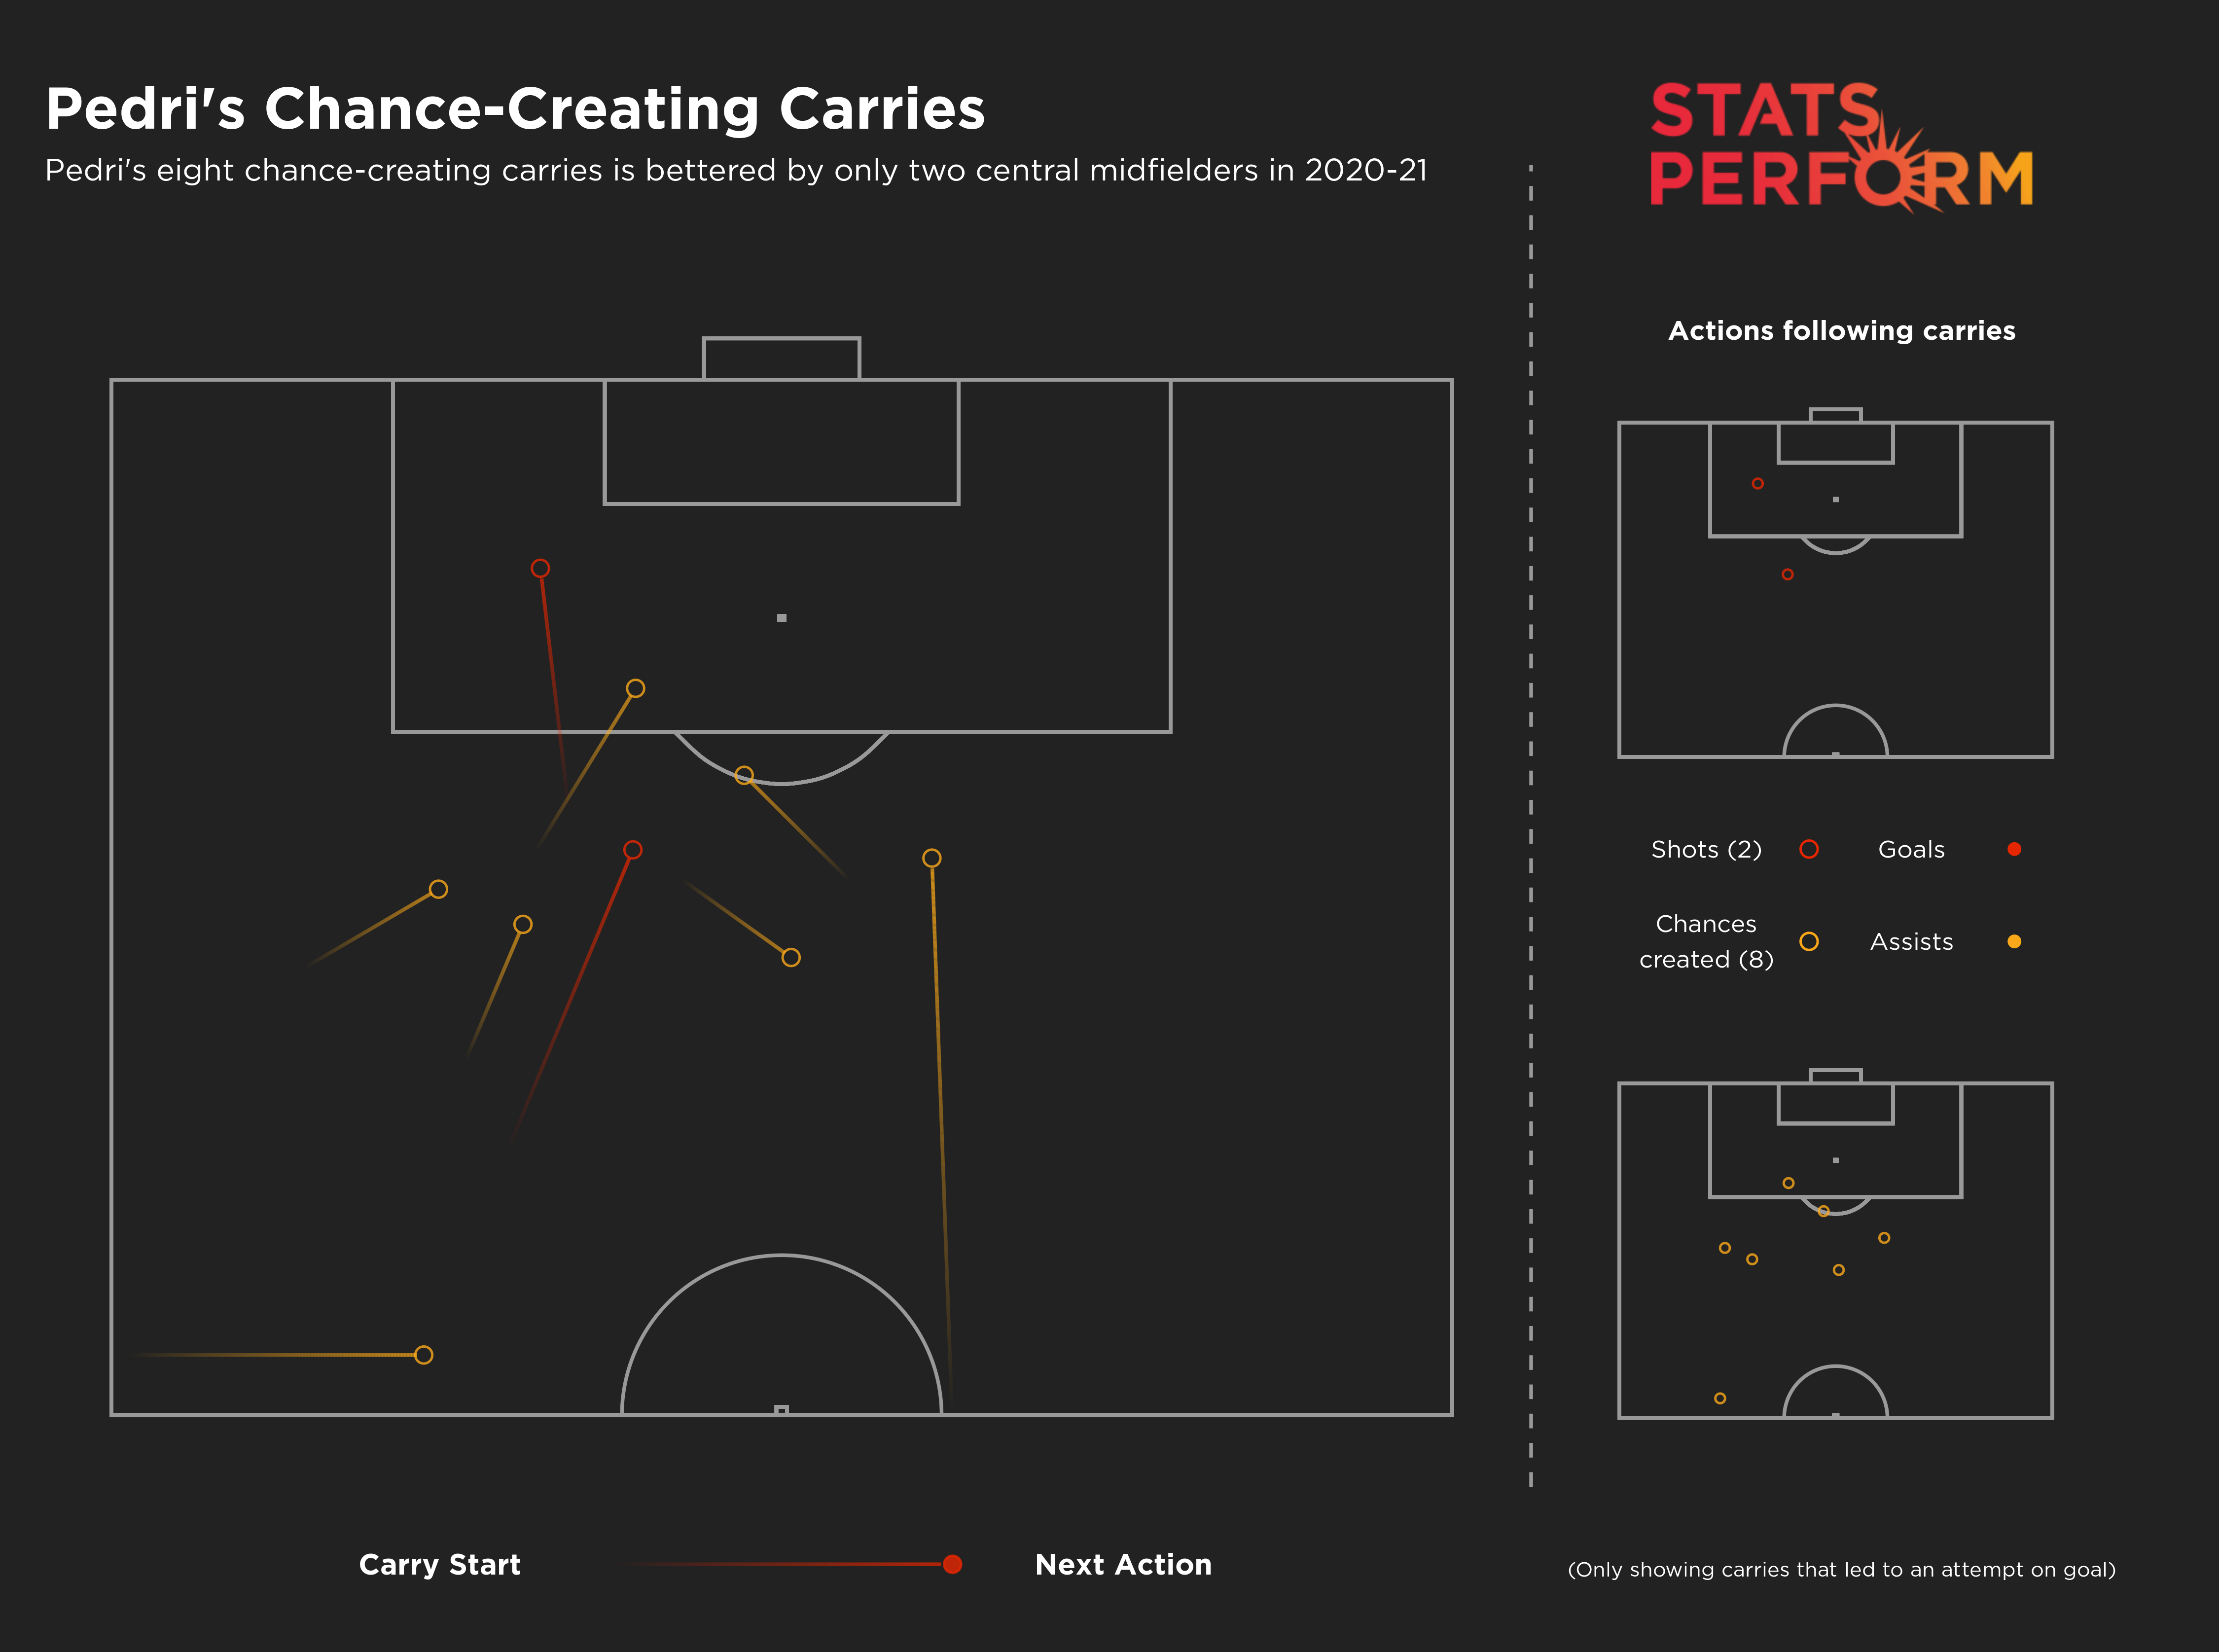 Only two central midfielders have created more chances than Pedri after a carry in 2020-21